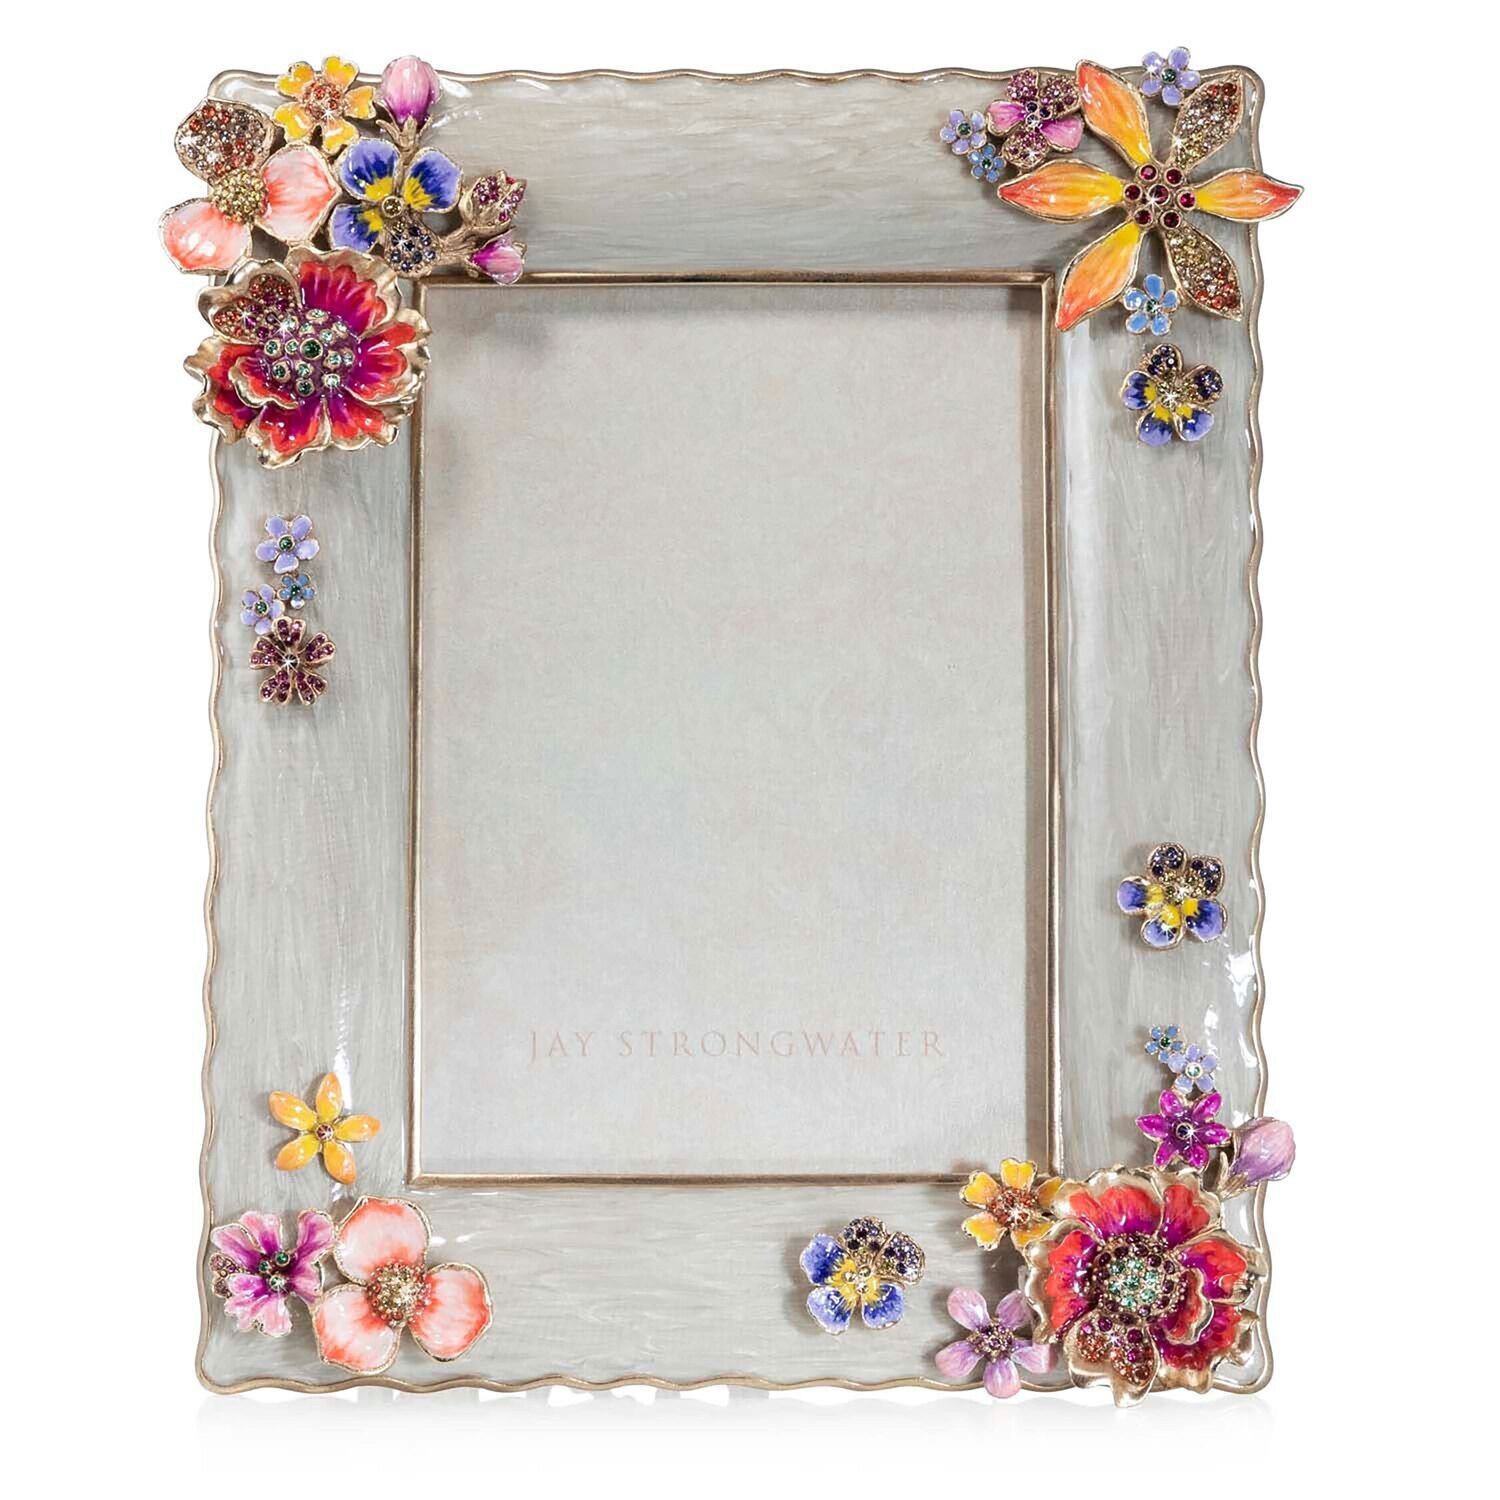 Jay Strongwater 5 x 7 Inch Bouquet Picture Frame SPF5886-256